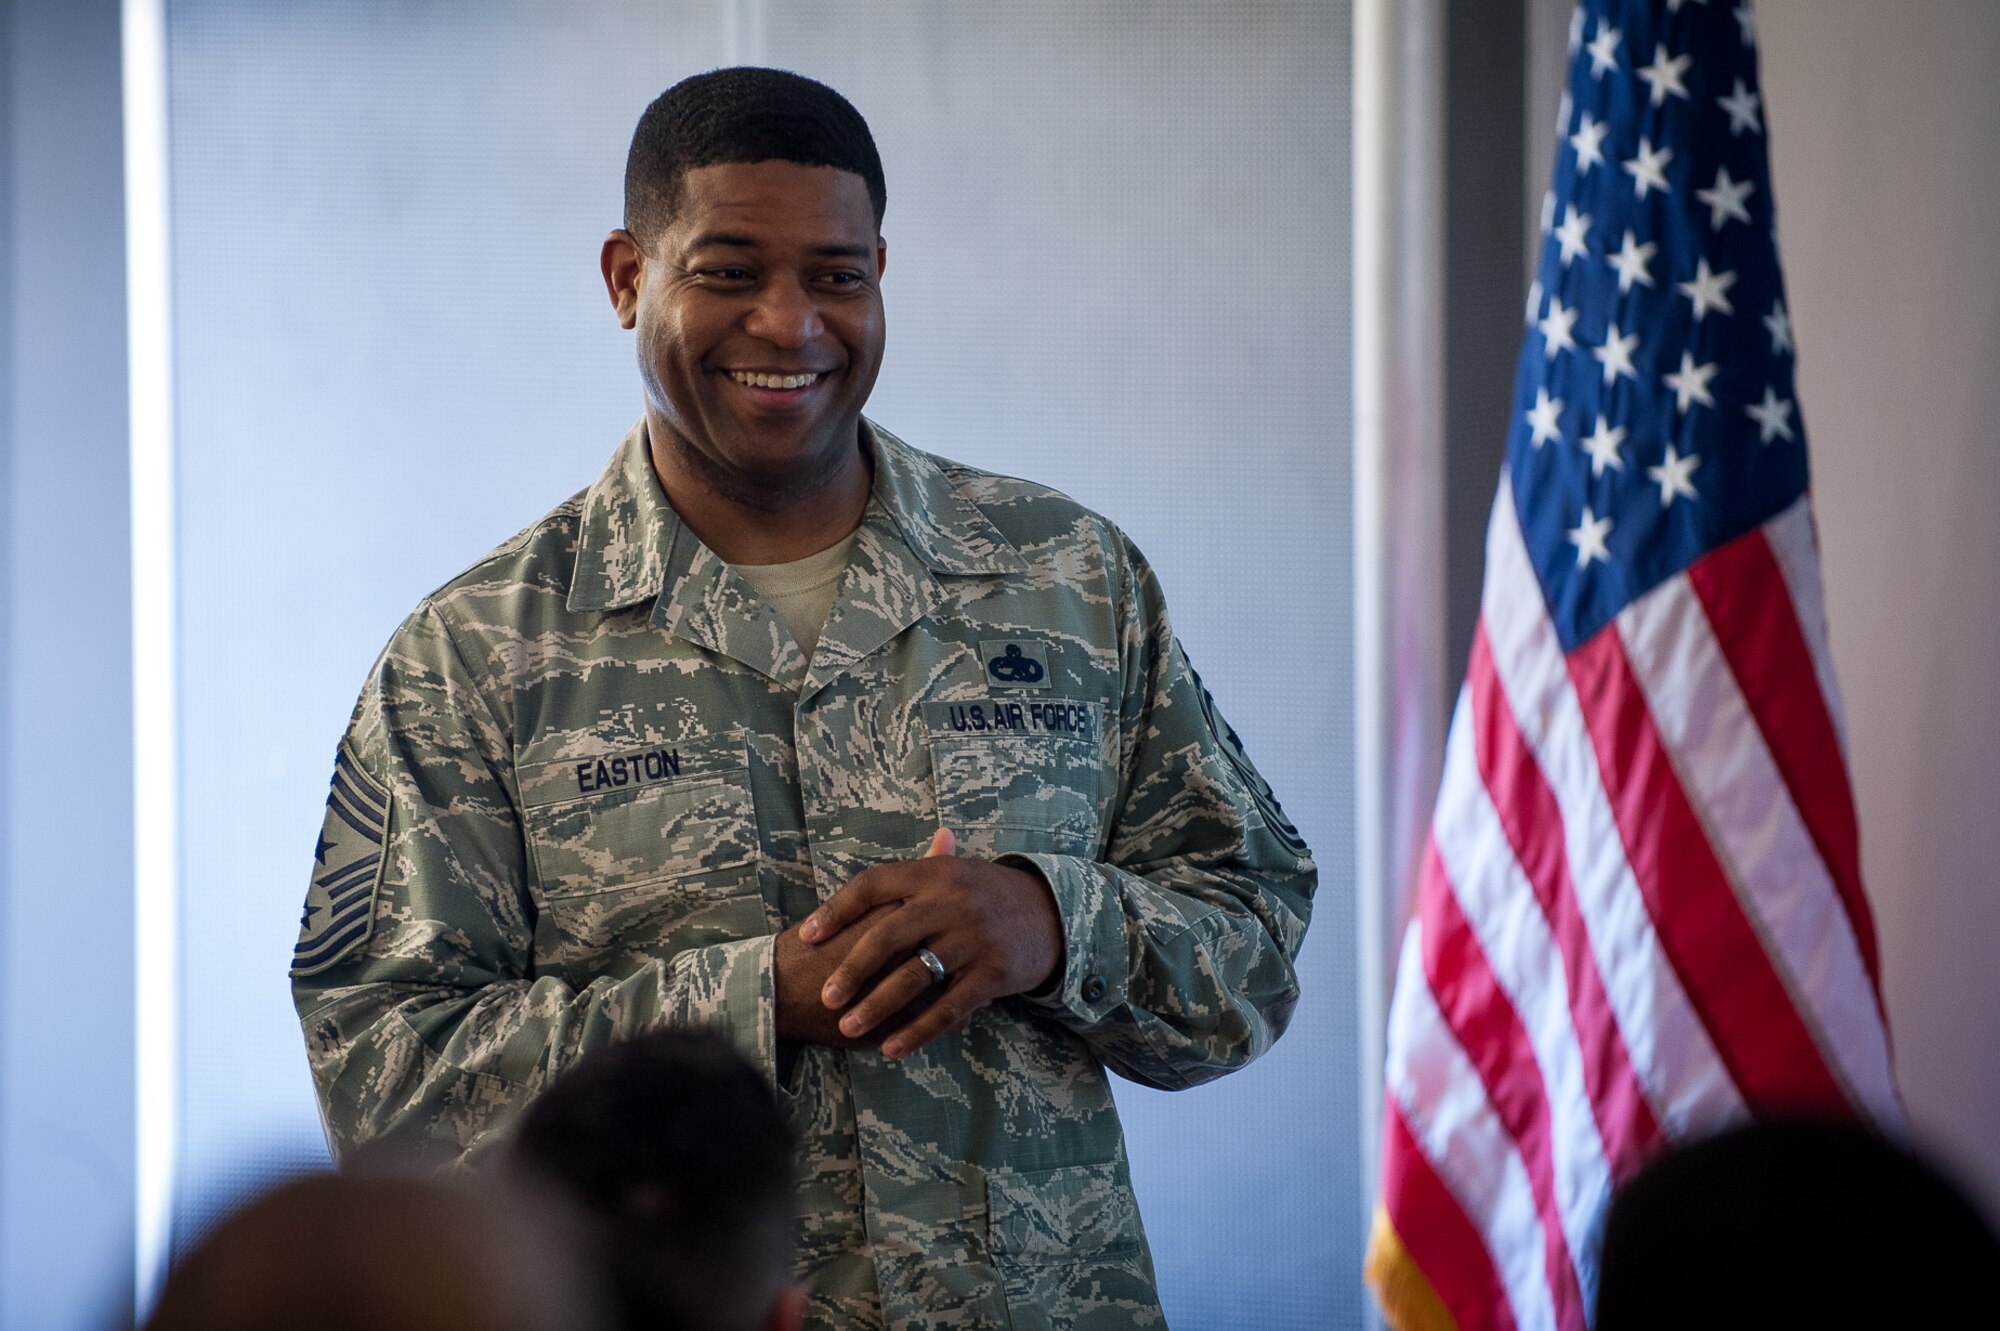 U.S. Air Force Chief Master Sgt. Phillip L. Easton, U.S. Air Forces in Europe Air Forces Africa command chief, speaks to NCOs during the Atlantic Stripe course at the USAFE Conference Center on Ramstein Air Base, Germany, May 9, 2017. Easton shared experiences he had with past supervisors and encouraged the NCOs to strive to be better than their former supervision. (U.S. Air Force photo by Senior Airman Devin Boyer/Released)